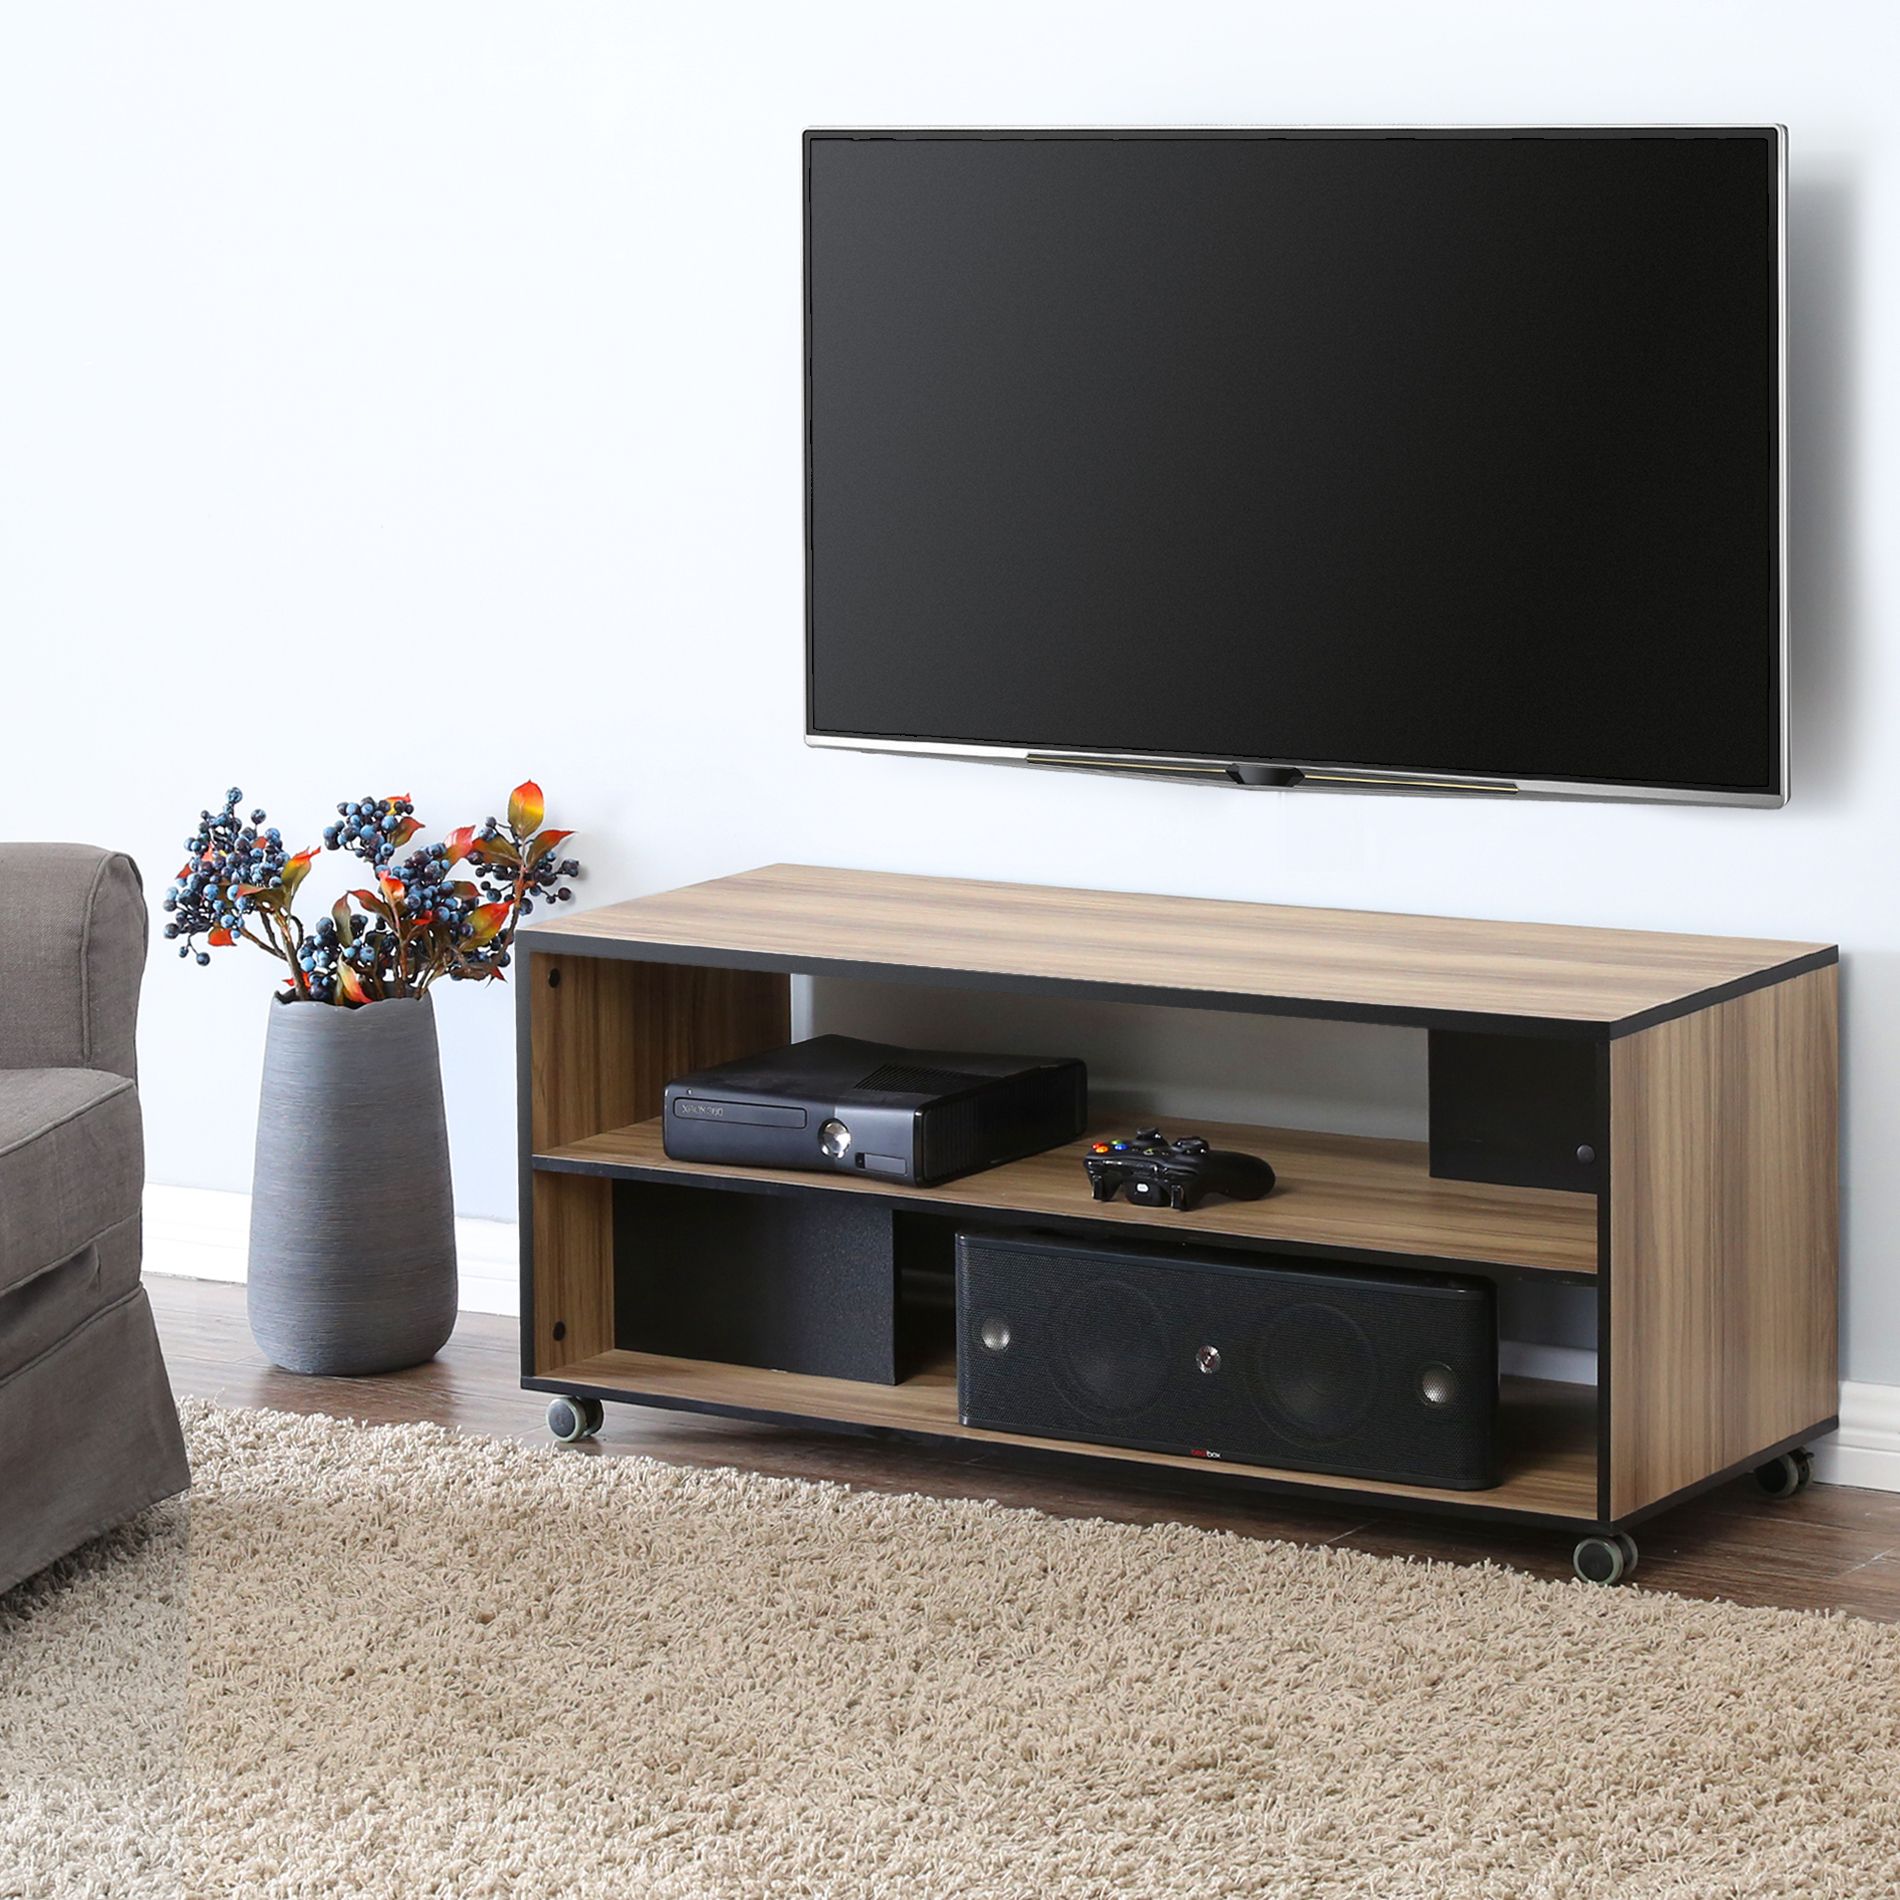 Fitueyes Wood Tv Stand Storage Console With Wheels For 23 Within Wood Tv Stands (View 9 of 15)